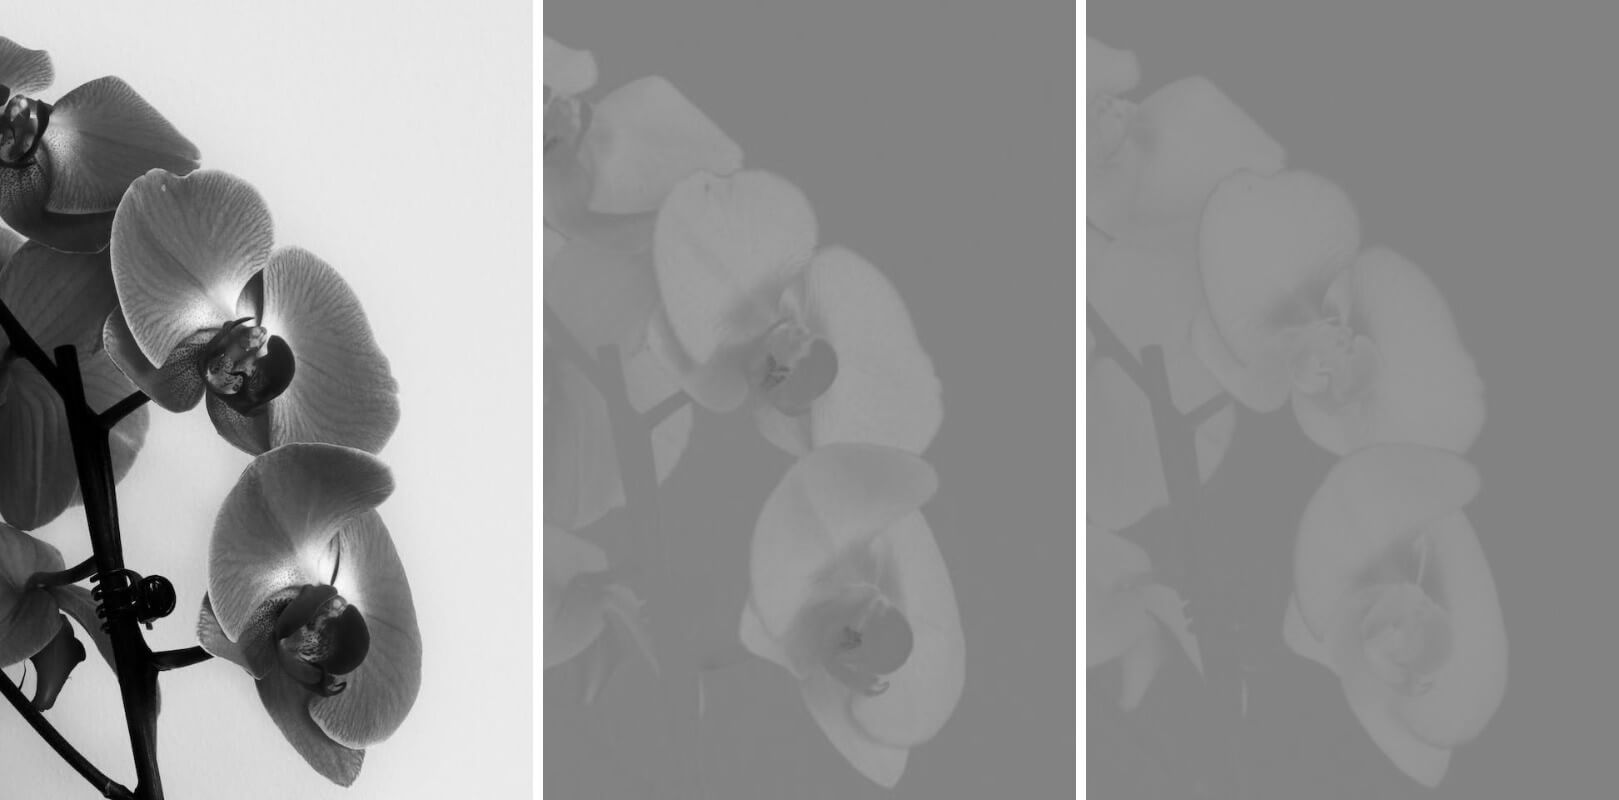 This example uses grayscale mode to demonstrate the YCbCr channels in a monochromatic version. It converts a PNG image of a purple orchid into the luminance, chrominance blue difference, and chrominance red difference channels, and then desaturates each pixel of the output images. (Source: Pexels.)